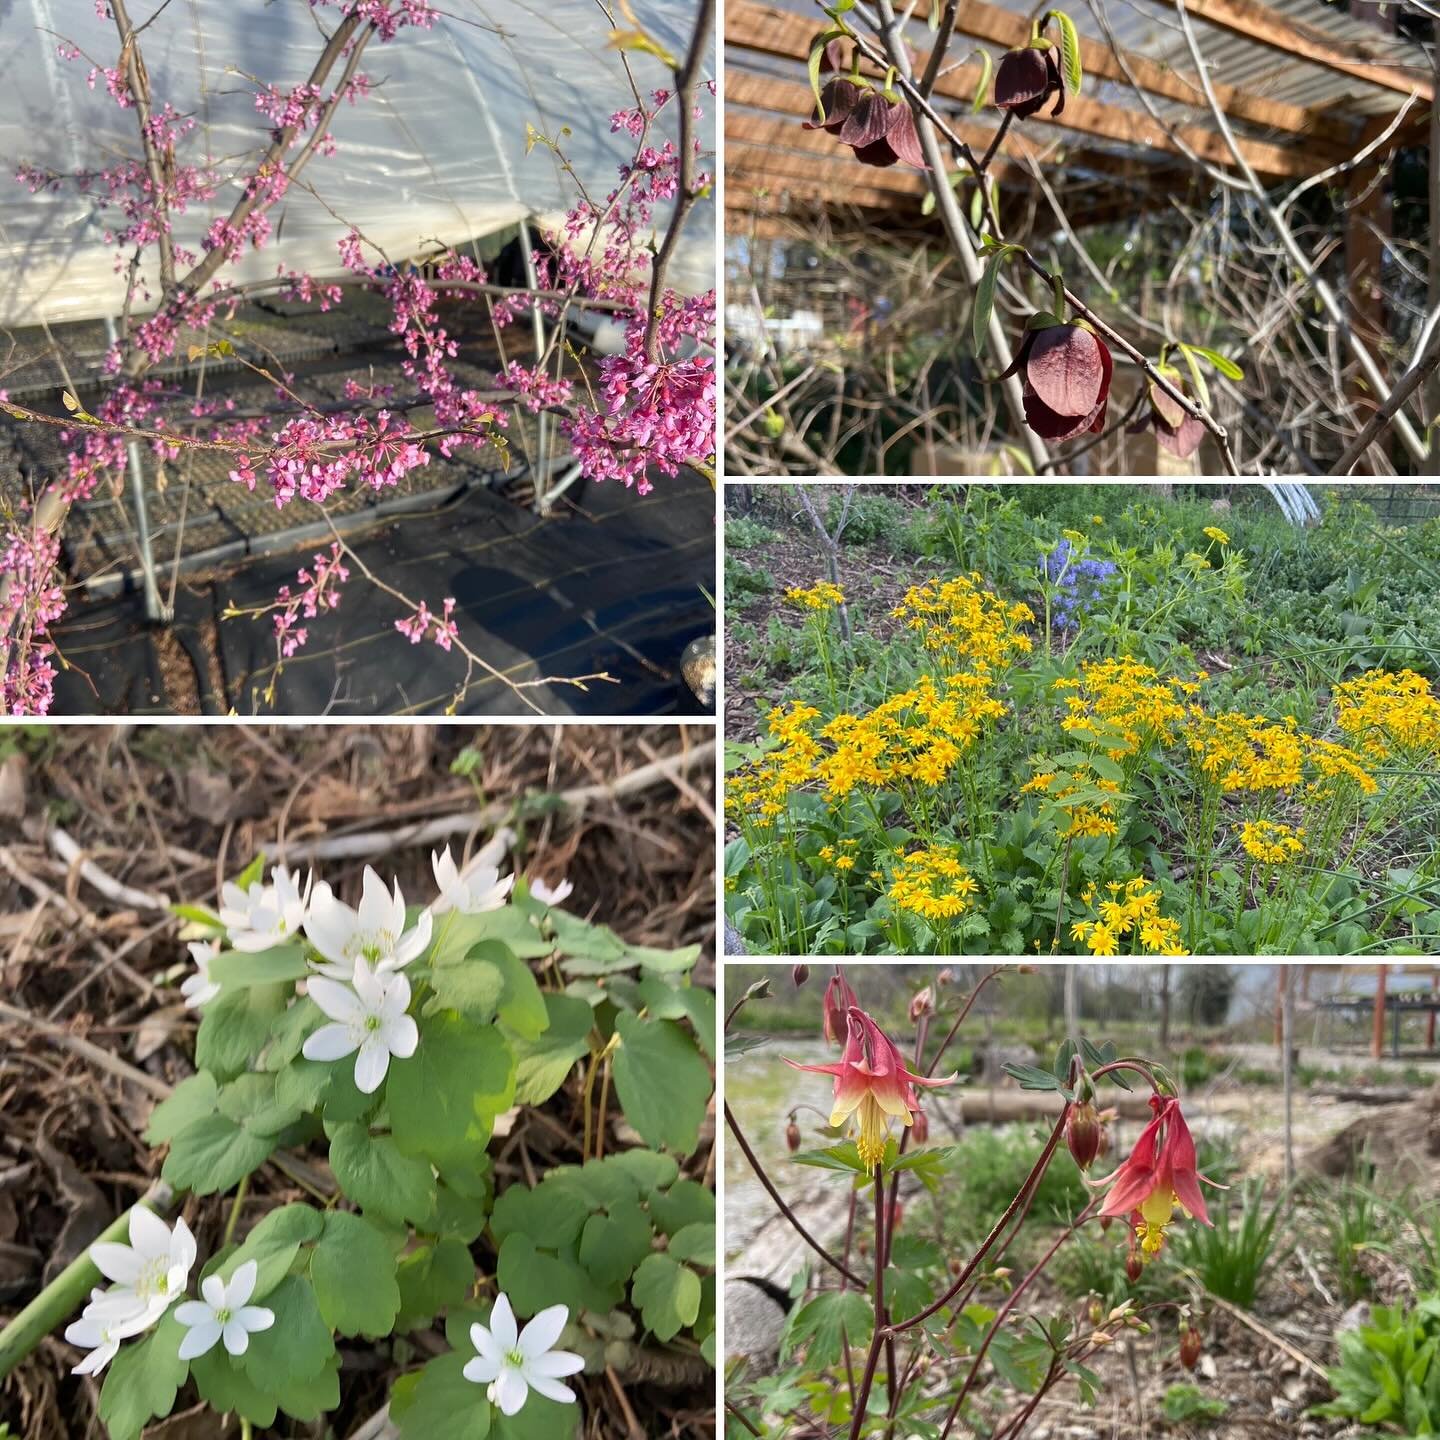 Hope you all can get out and enjoy all the spring blooms, I know we sure have. #springblooms #missourinativeplants #kansasnativeplants #cityrootsnursery